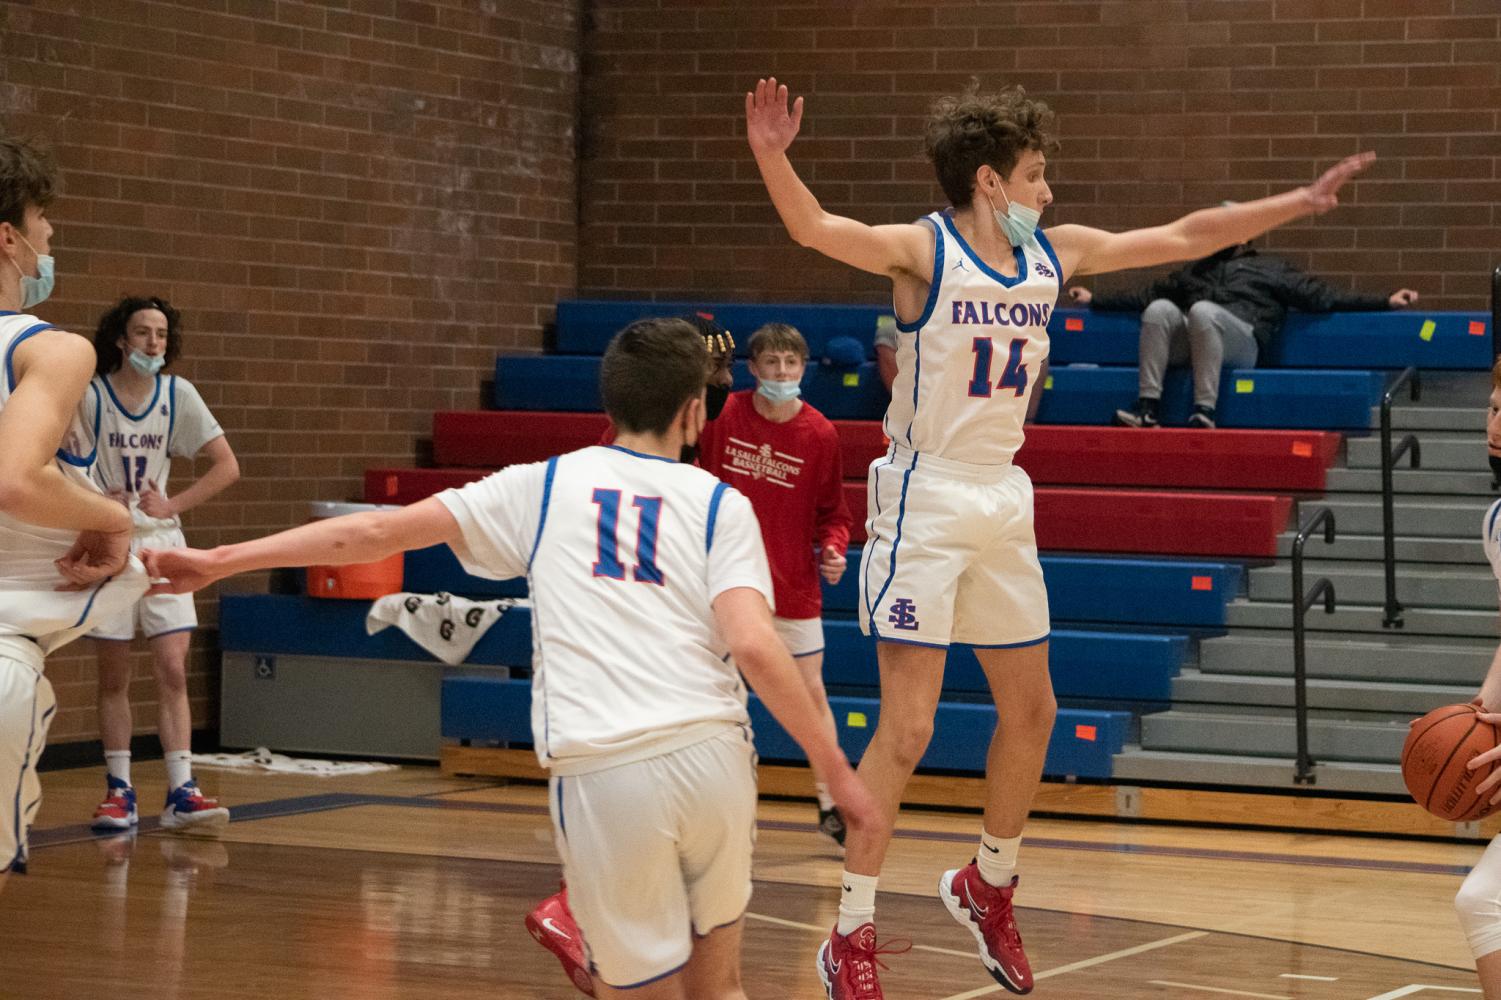 Leaping+Back+Into+Action%3A+La+Salle+Boys+Basketball+Takes+On+West+Linn